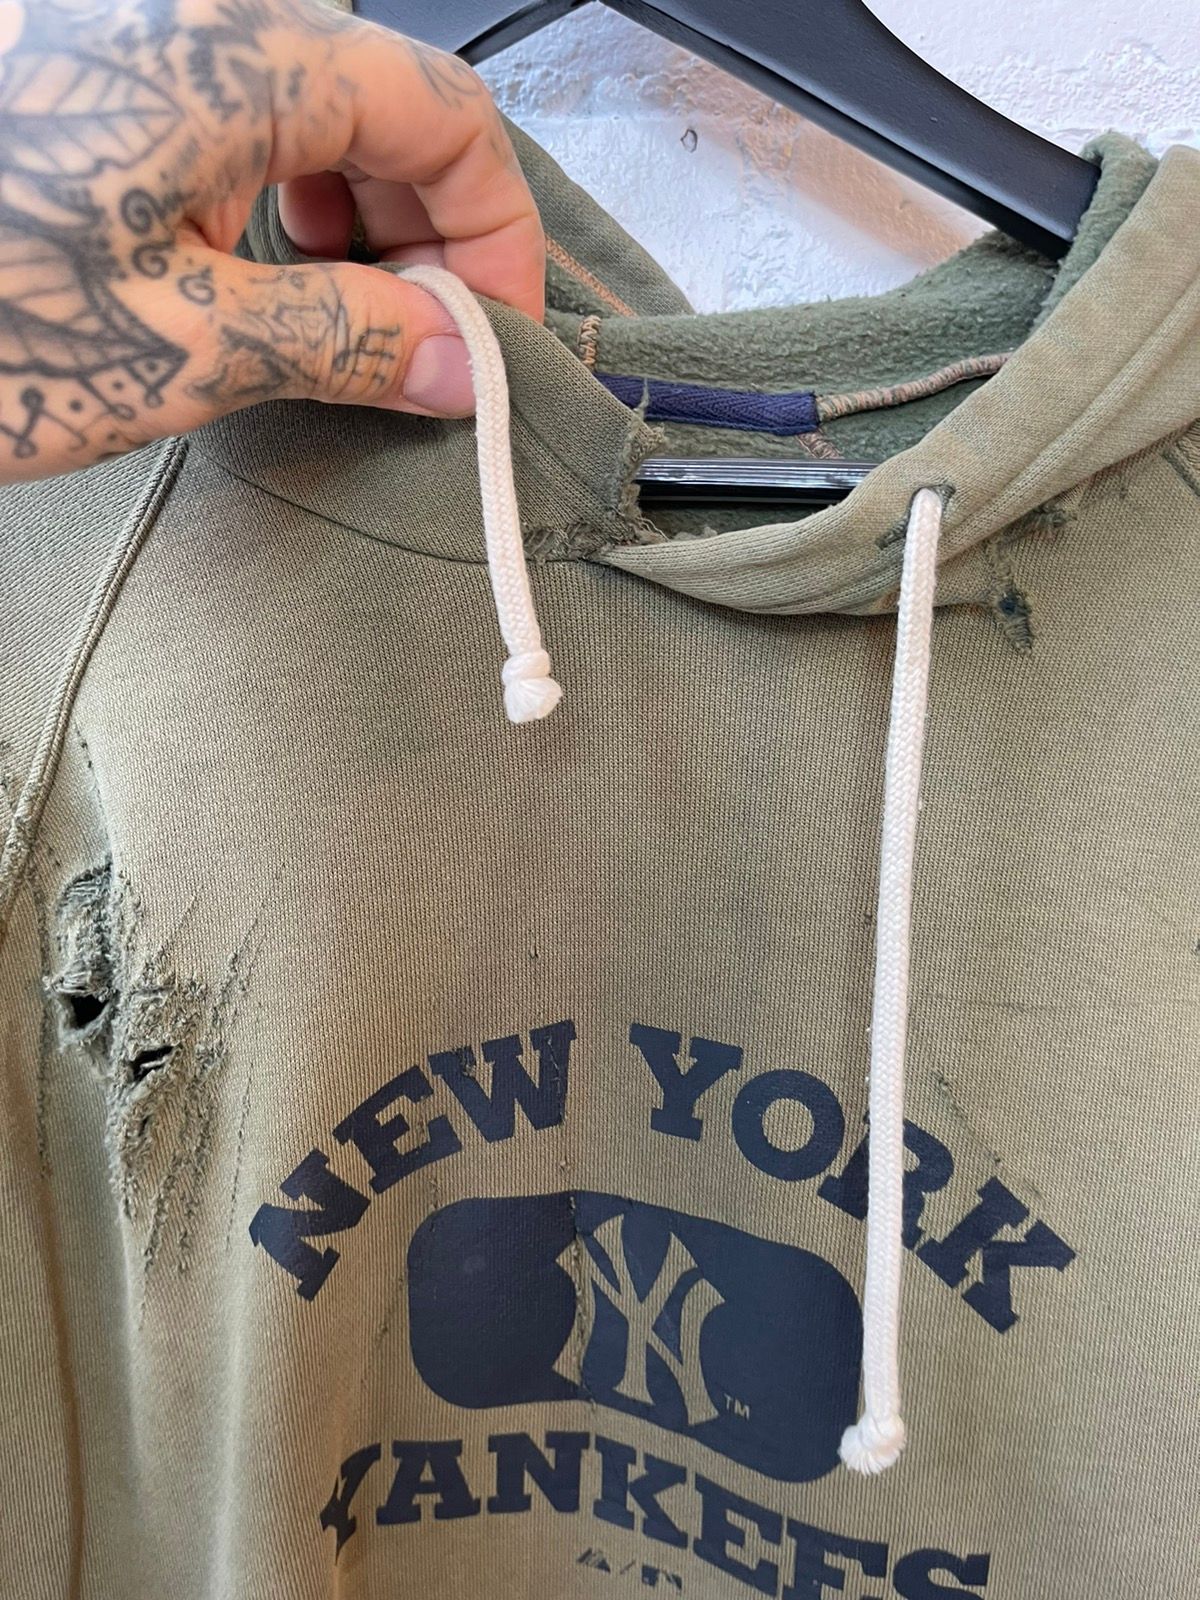 Vintage 2000s Thrashed Army Green NY Yankees Hoodie New York